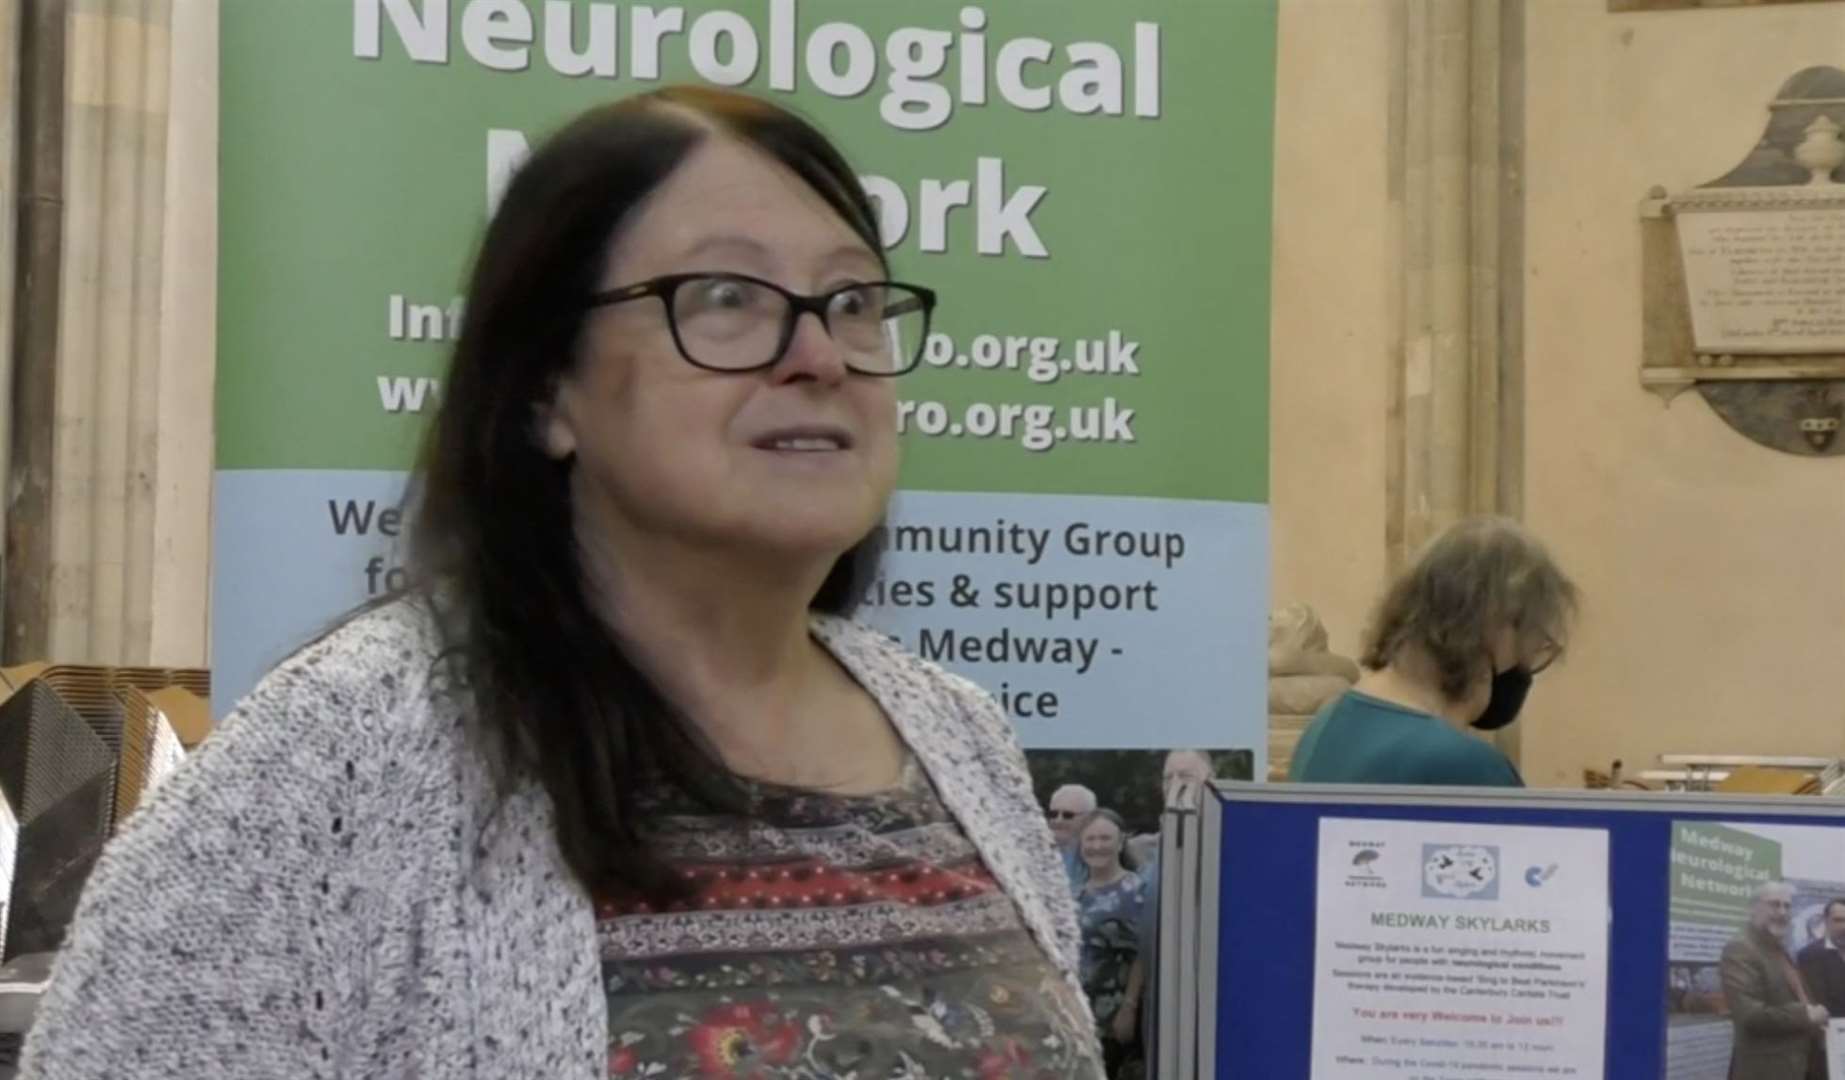 The Medway Neurological Network say early stage neurological conditions are often unnoticed